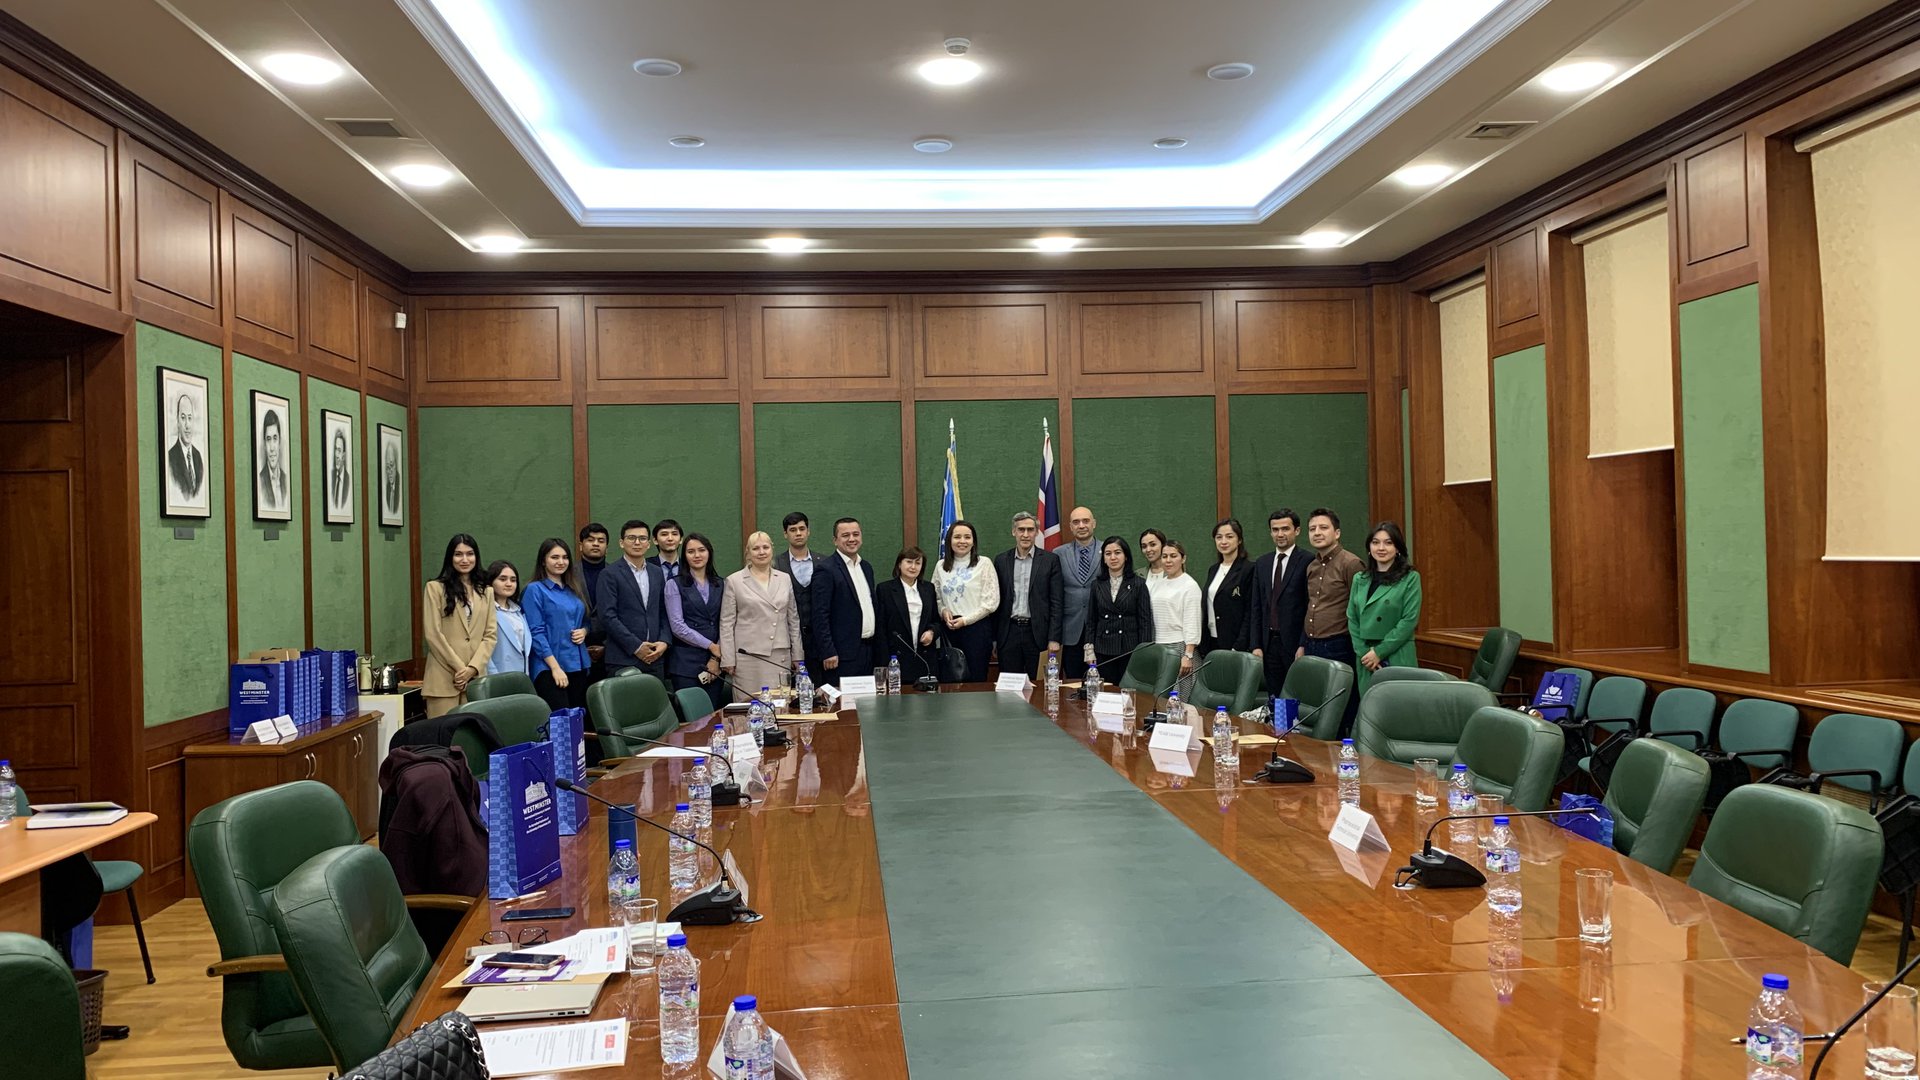 Yesterday, Westminster International University in Tashkent, in cooperation with the British Council, organized a round table on the topic "Alumni Relations Management"